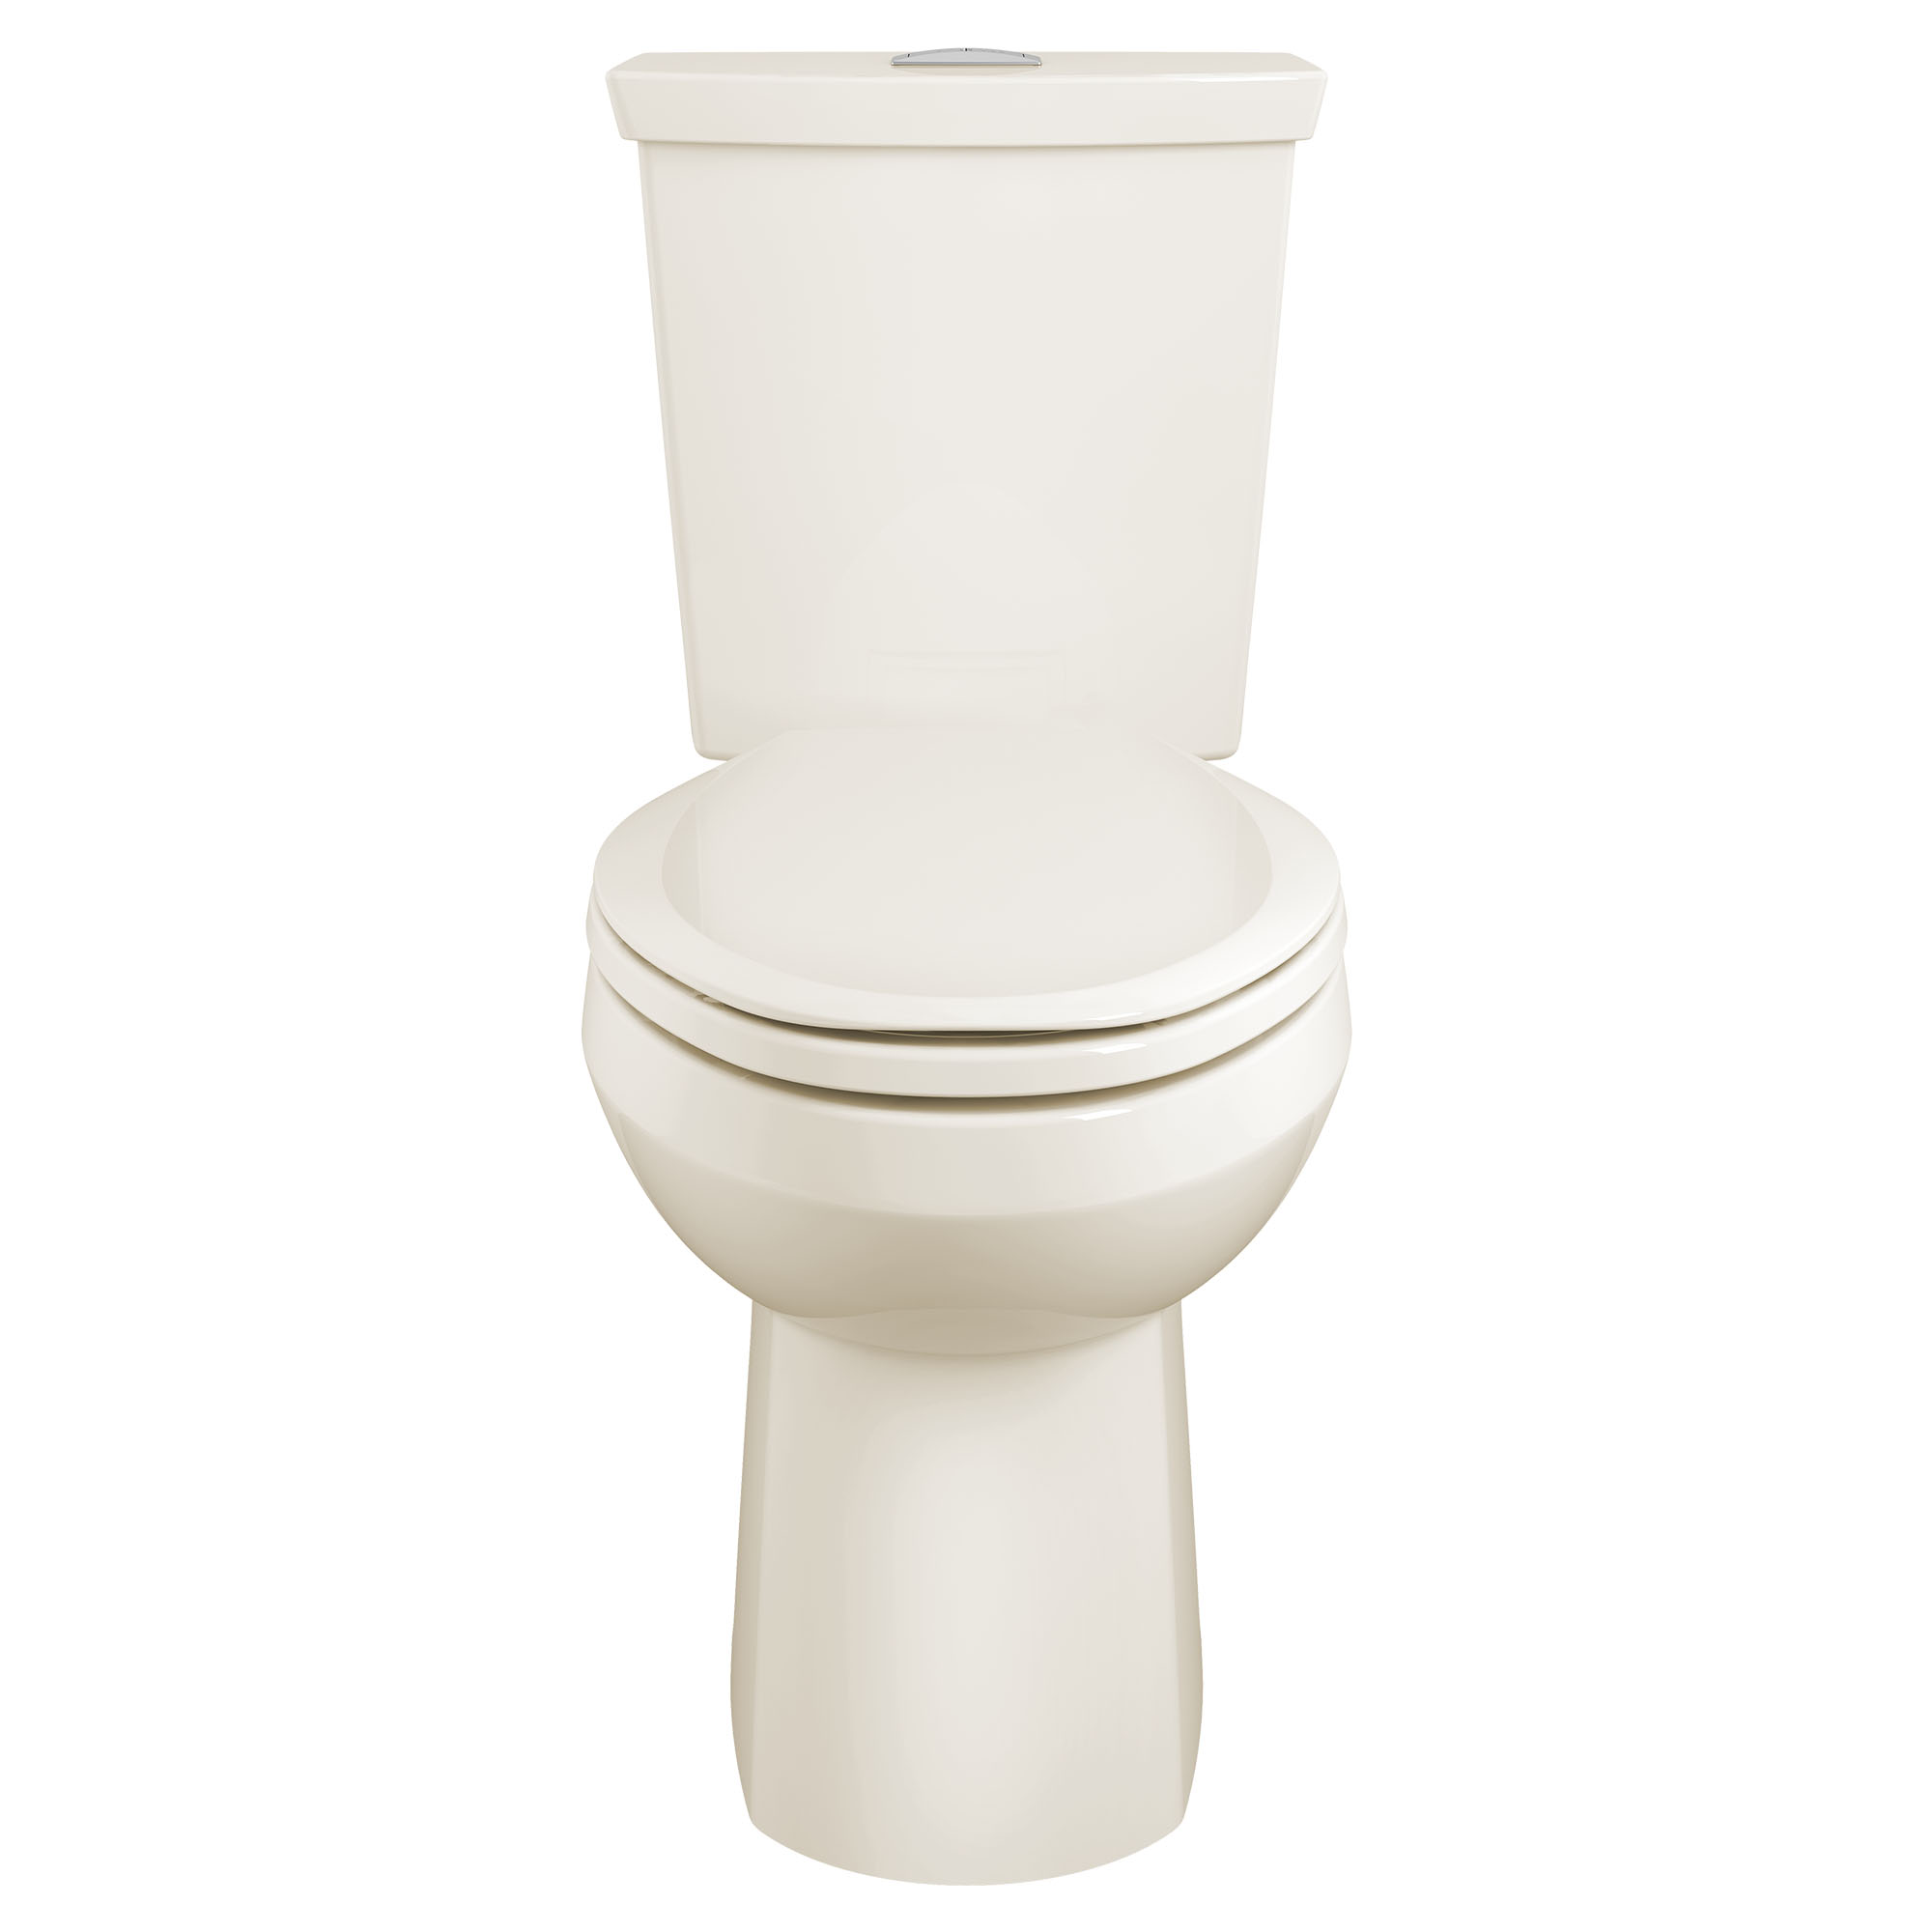 H2Option™ Two-Piece Dual Flush 1.28 gpf/4.8 Lpf and 0.92 gpf/3.5 Lpf Chair Height Elongated Toilet Less Seat